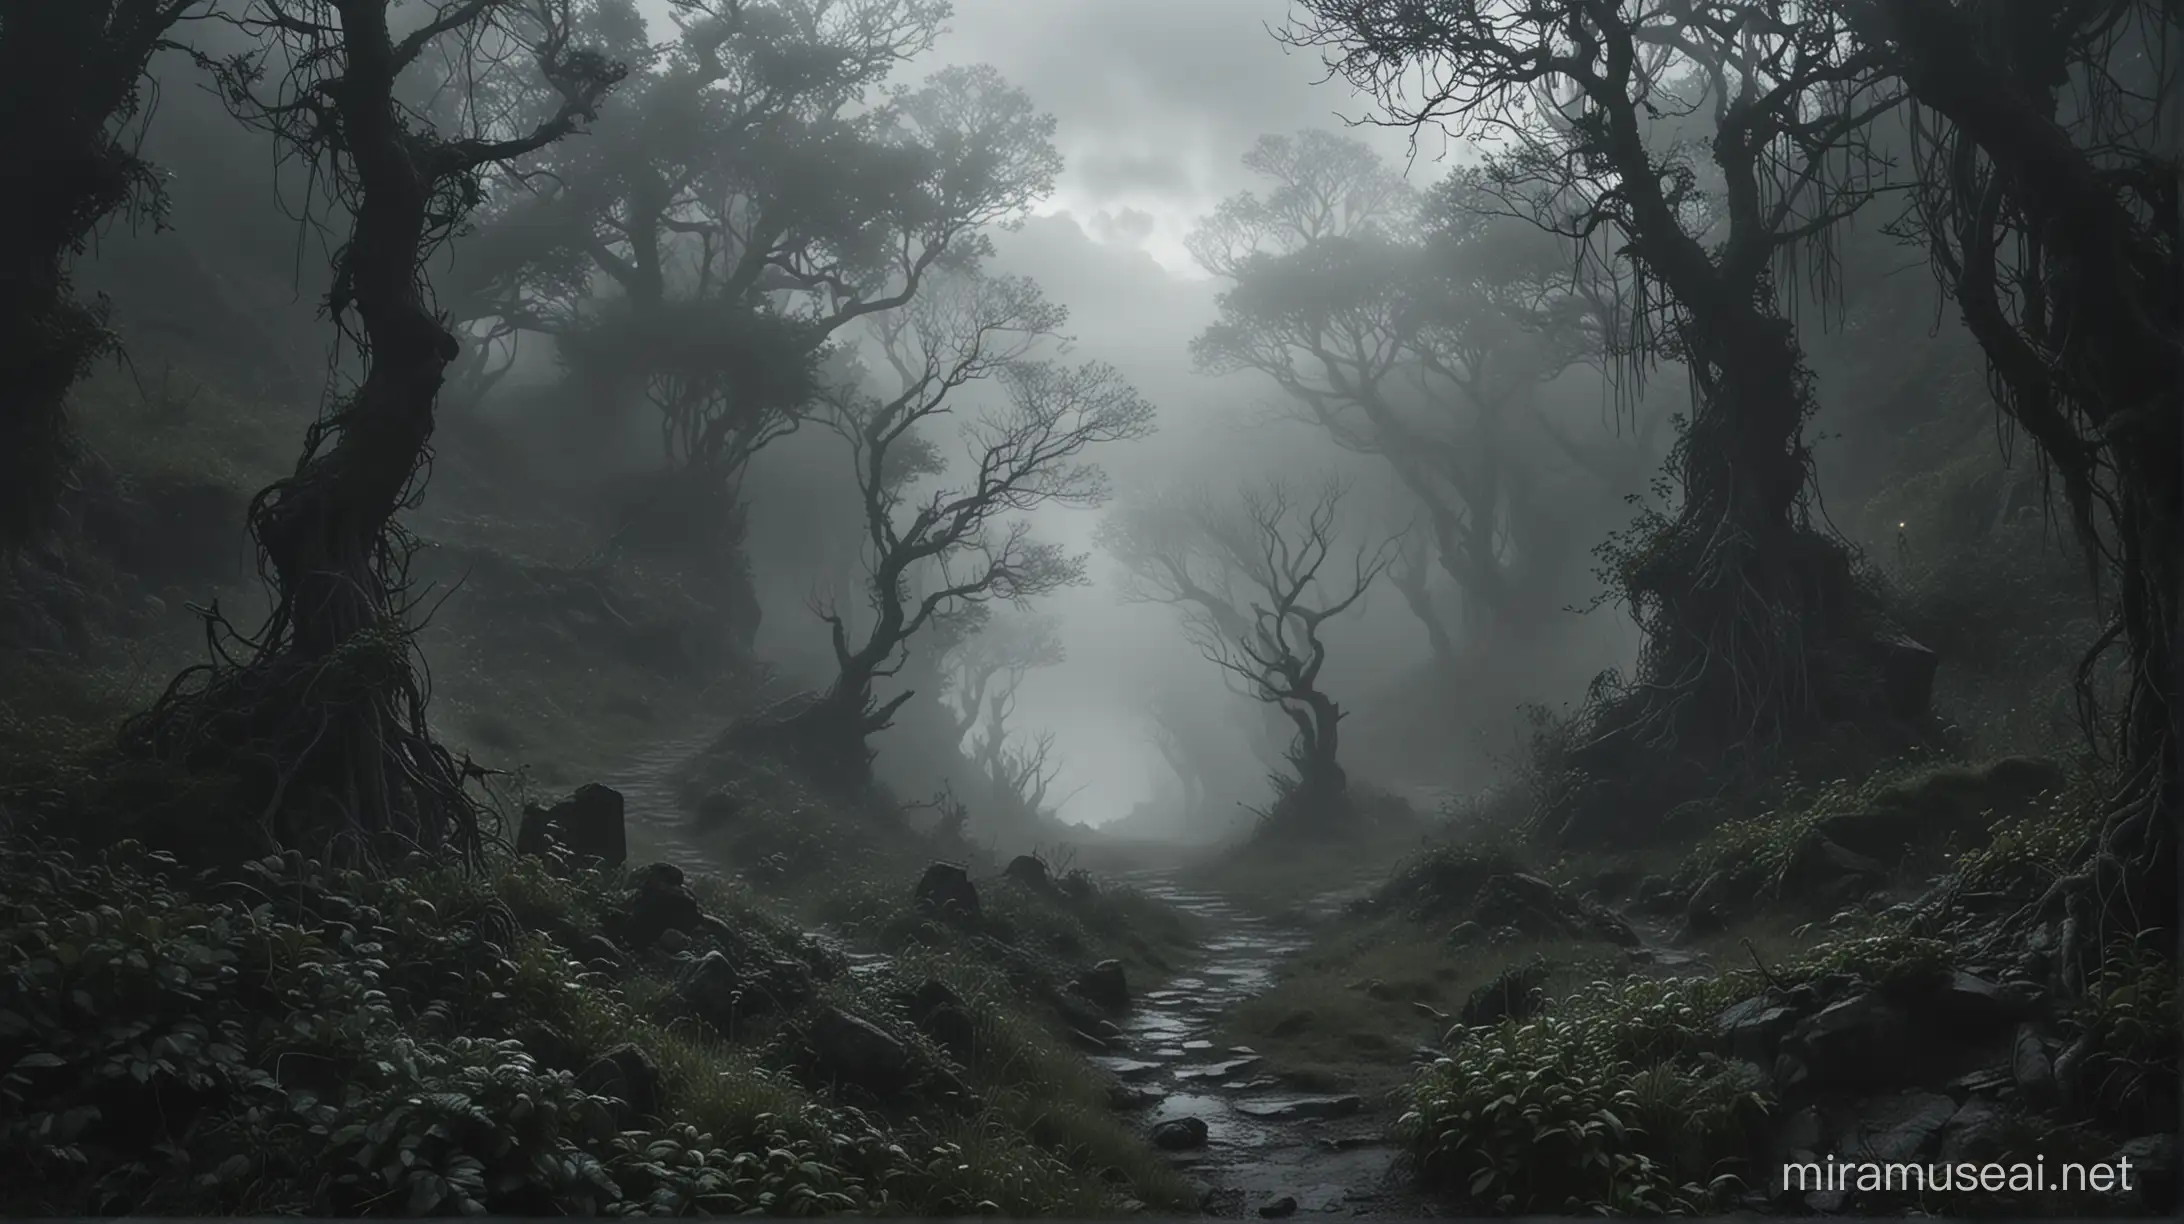 A dark, mist-shrouded landscape unfolds before our eyes, mysterious and foreboding. Jagged cliffs loom in the distance, partially obscured by swirling clouds. In the foreground, an ancient, overgrown path winds its way through tangled vines and gnarled trees, disappearing into the unknown depths. Strange, ethereal lights flicker faintly in the distance, hinting at unseen secrets hidden within the eerie landscape. A sense of both wonder and trepidation fills the air as we embark on a journey into this enigmatic realm, where every shadow conceals a mystery waiting to be unveiled